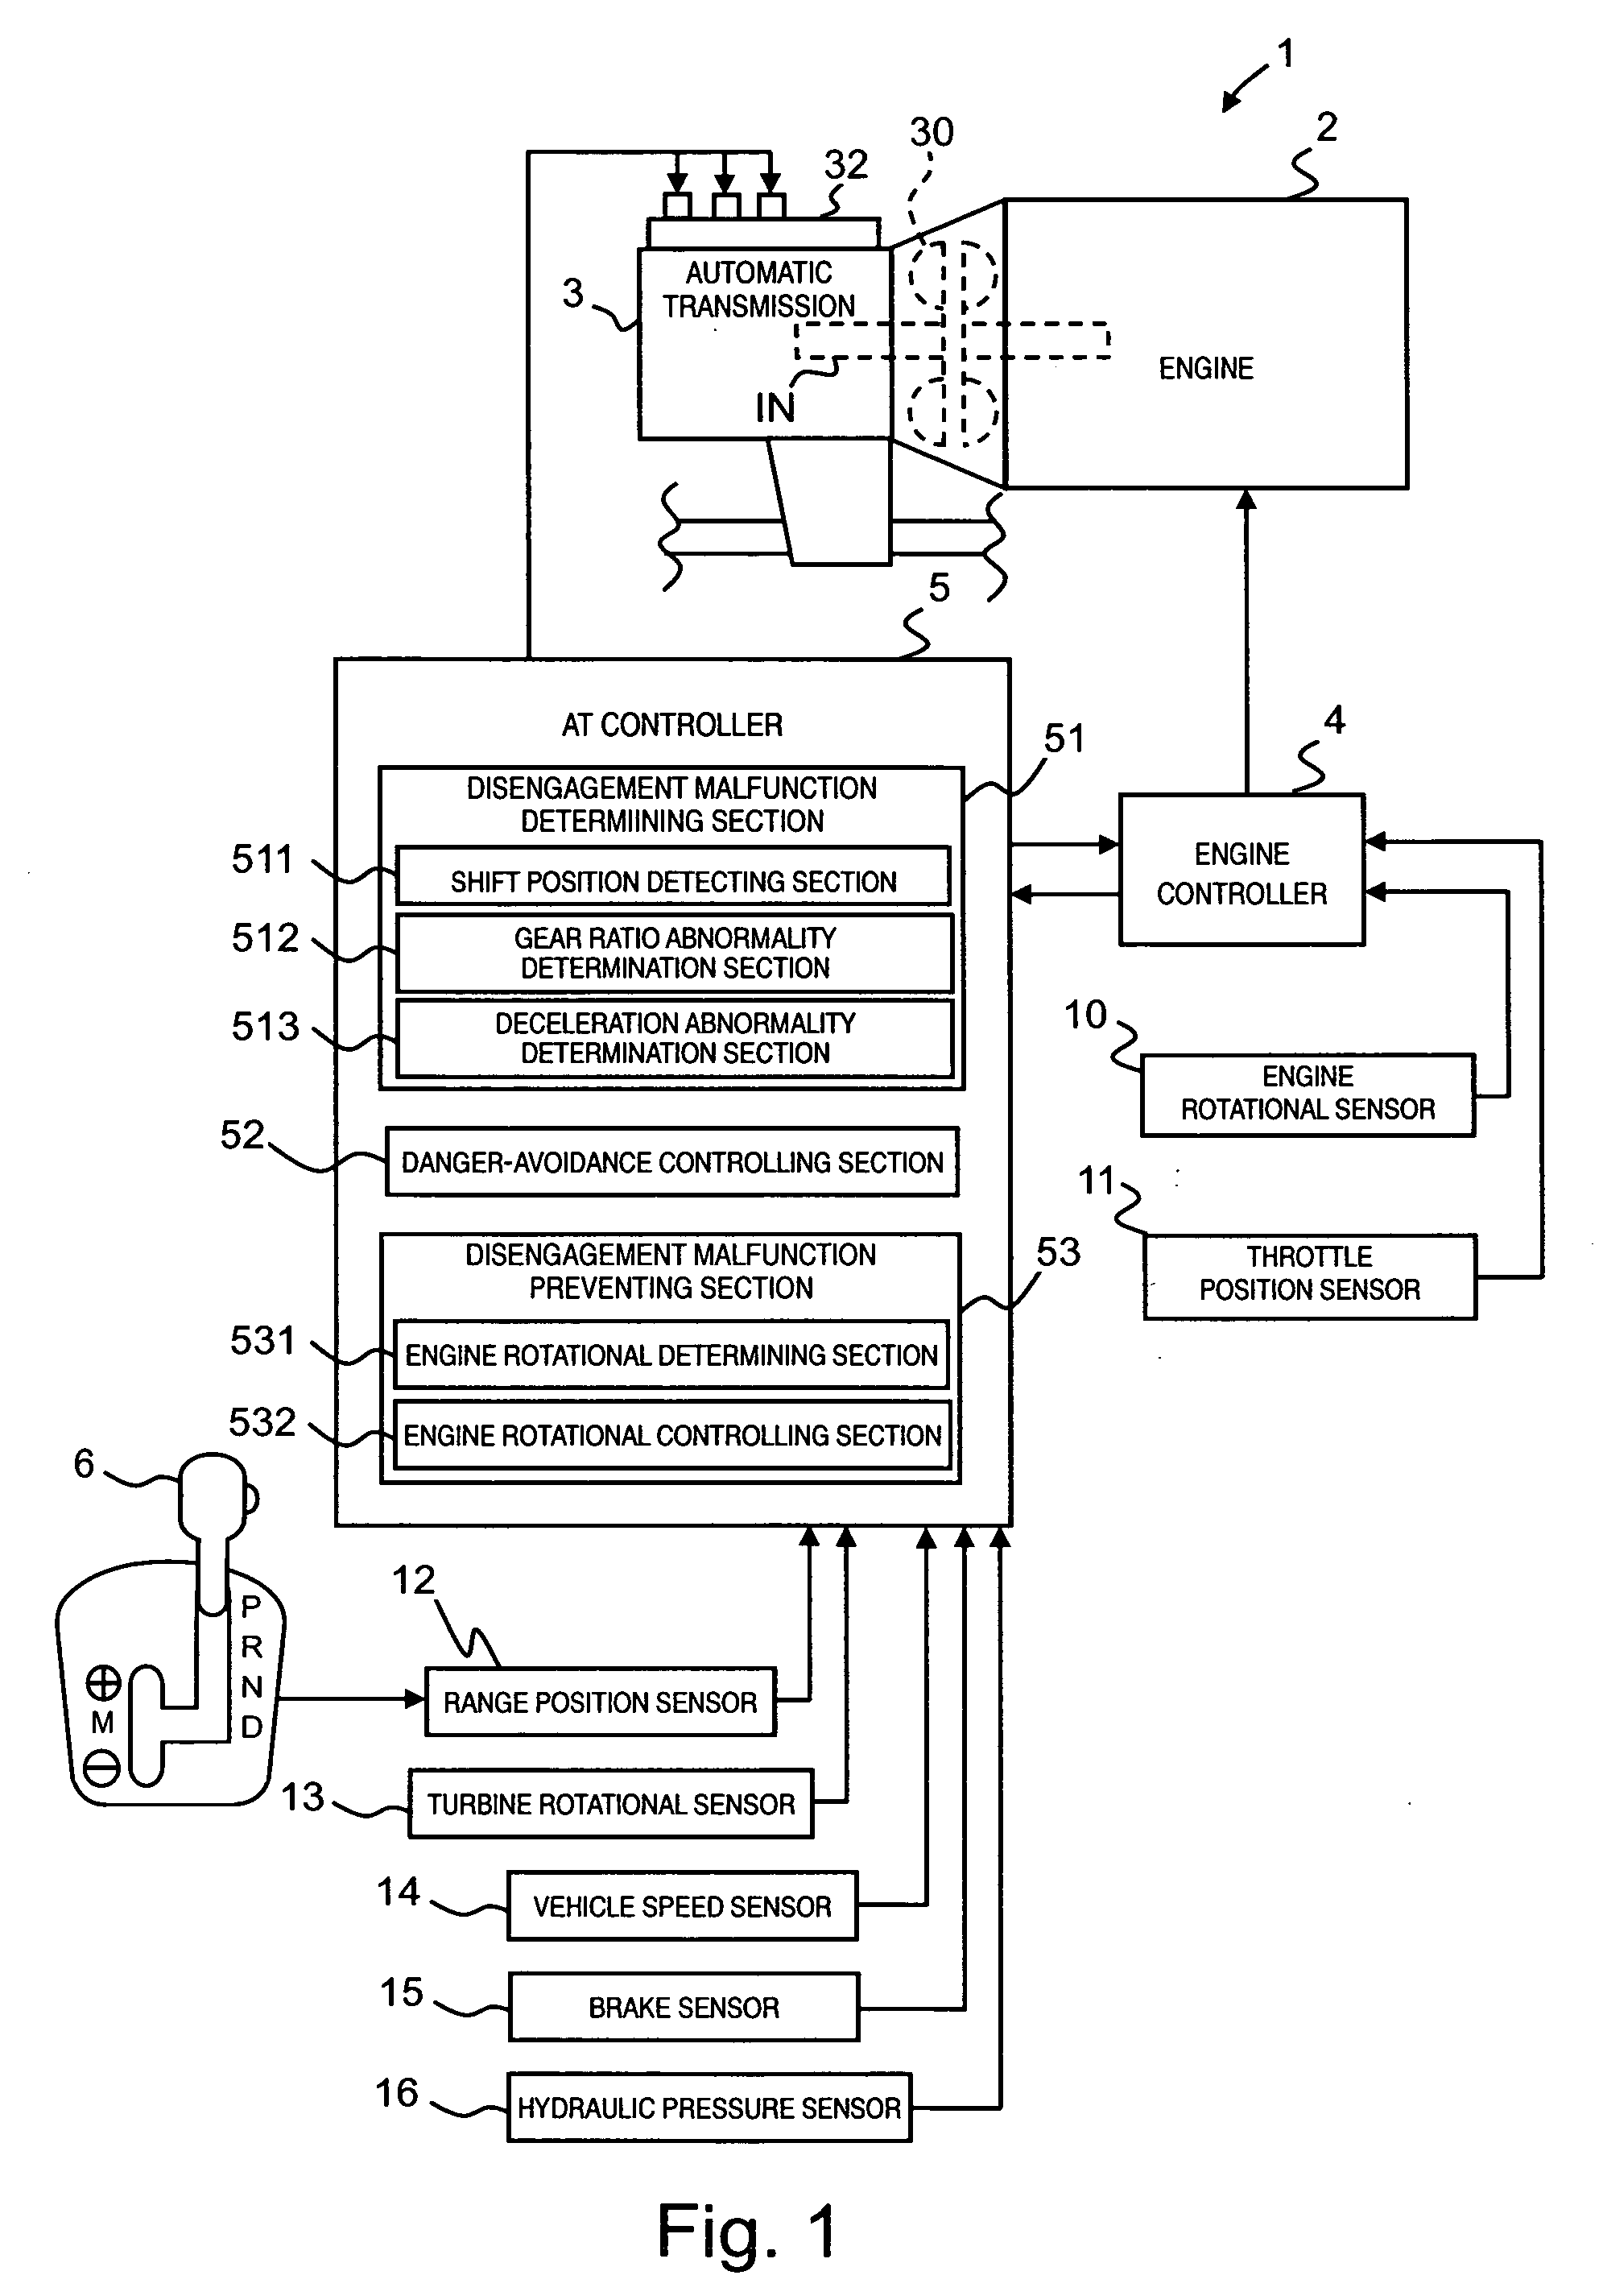 Automatic transmission control system